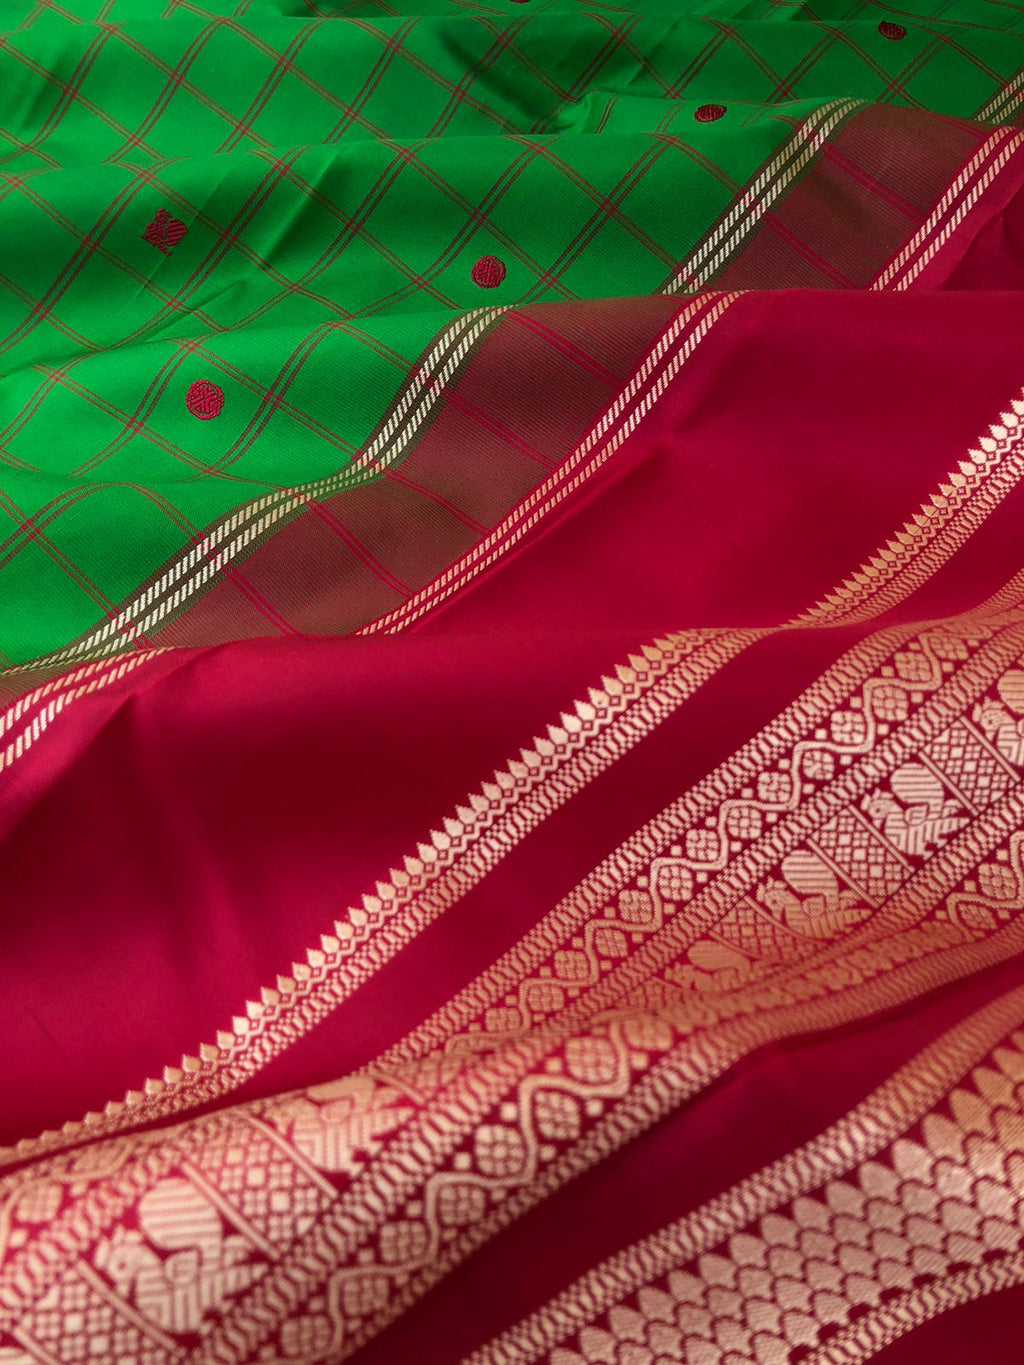 Sahasra - Stunning No Zari Korvai Kanchivarams - the traditional at the best deep green and deep red with beautiful woven annapakshi borders